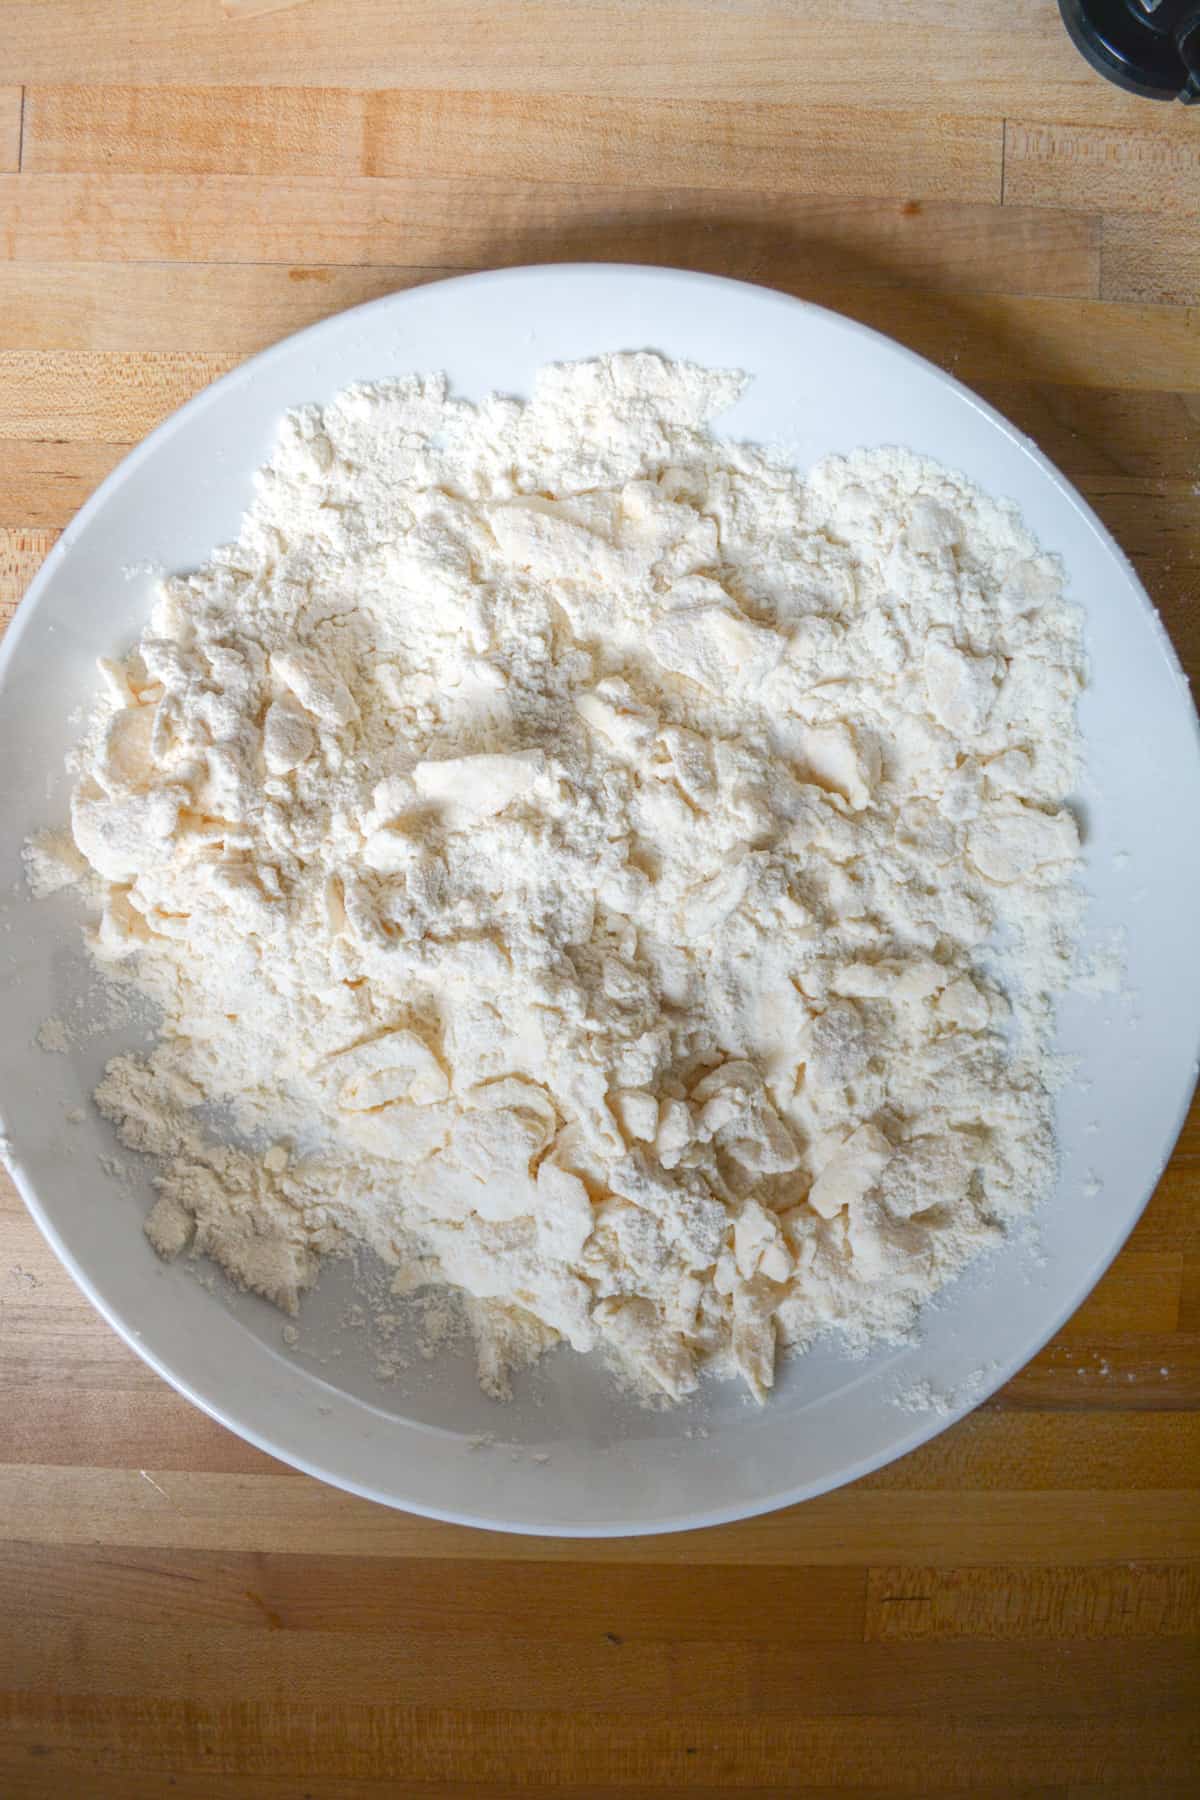 Butter cut into the dry ingredients.